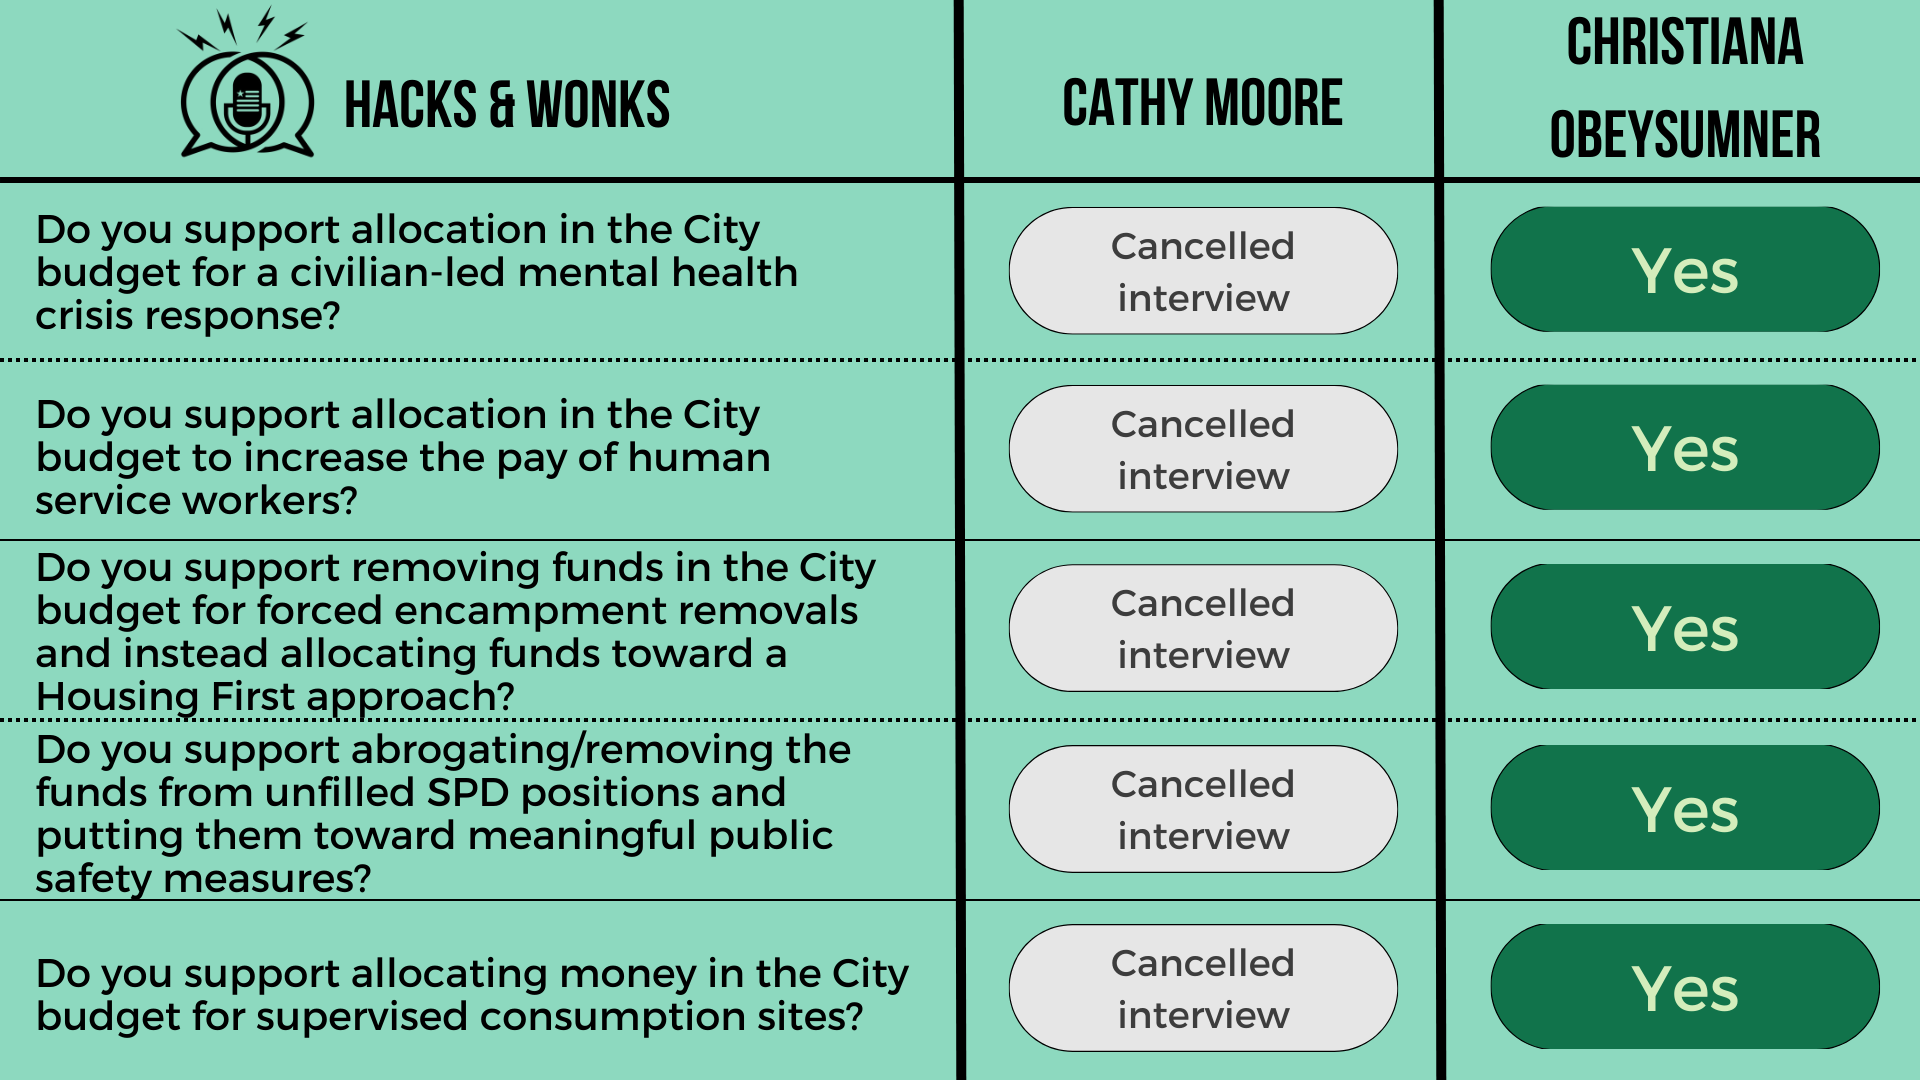 Q: Do you support allocation in the City budget for a civilian-led mental health crisis response? Cathy Moore: Cancelled interview, ChrisTiana ObeySumner: Yes  Q: Do you support allocation in the City budget to increase the pay of human service worke